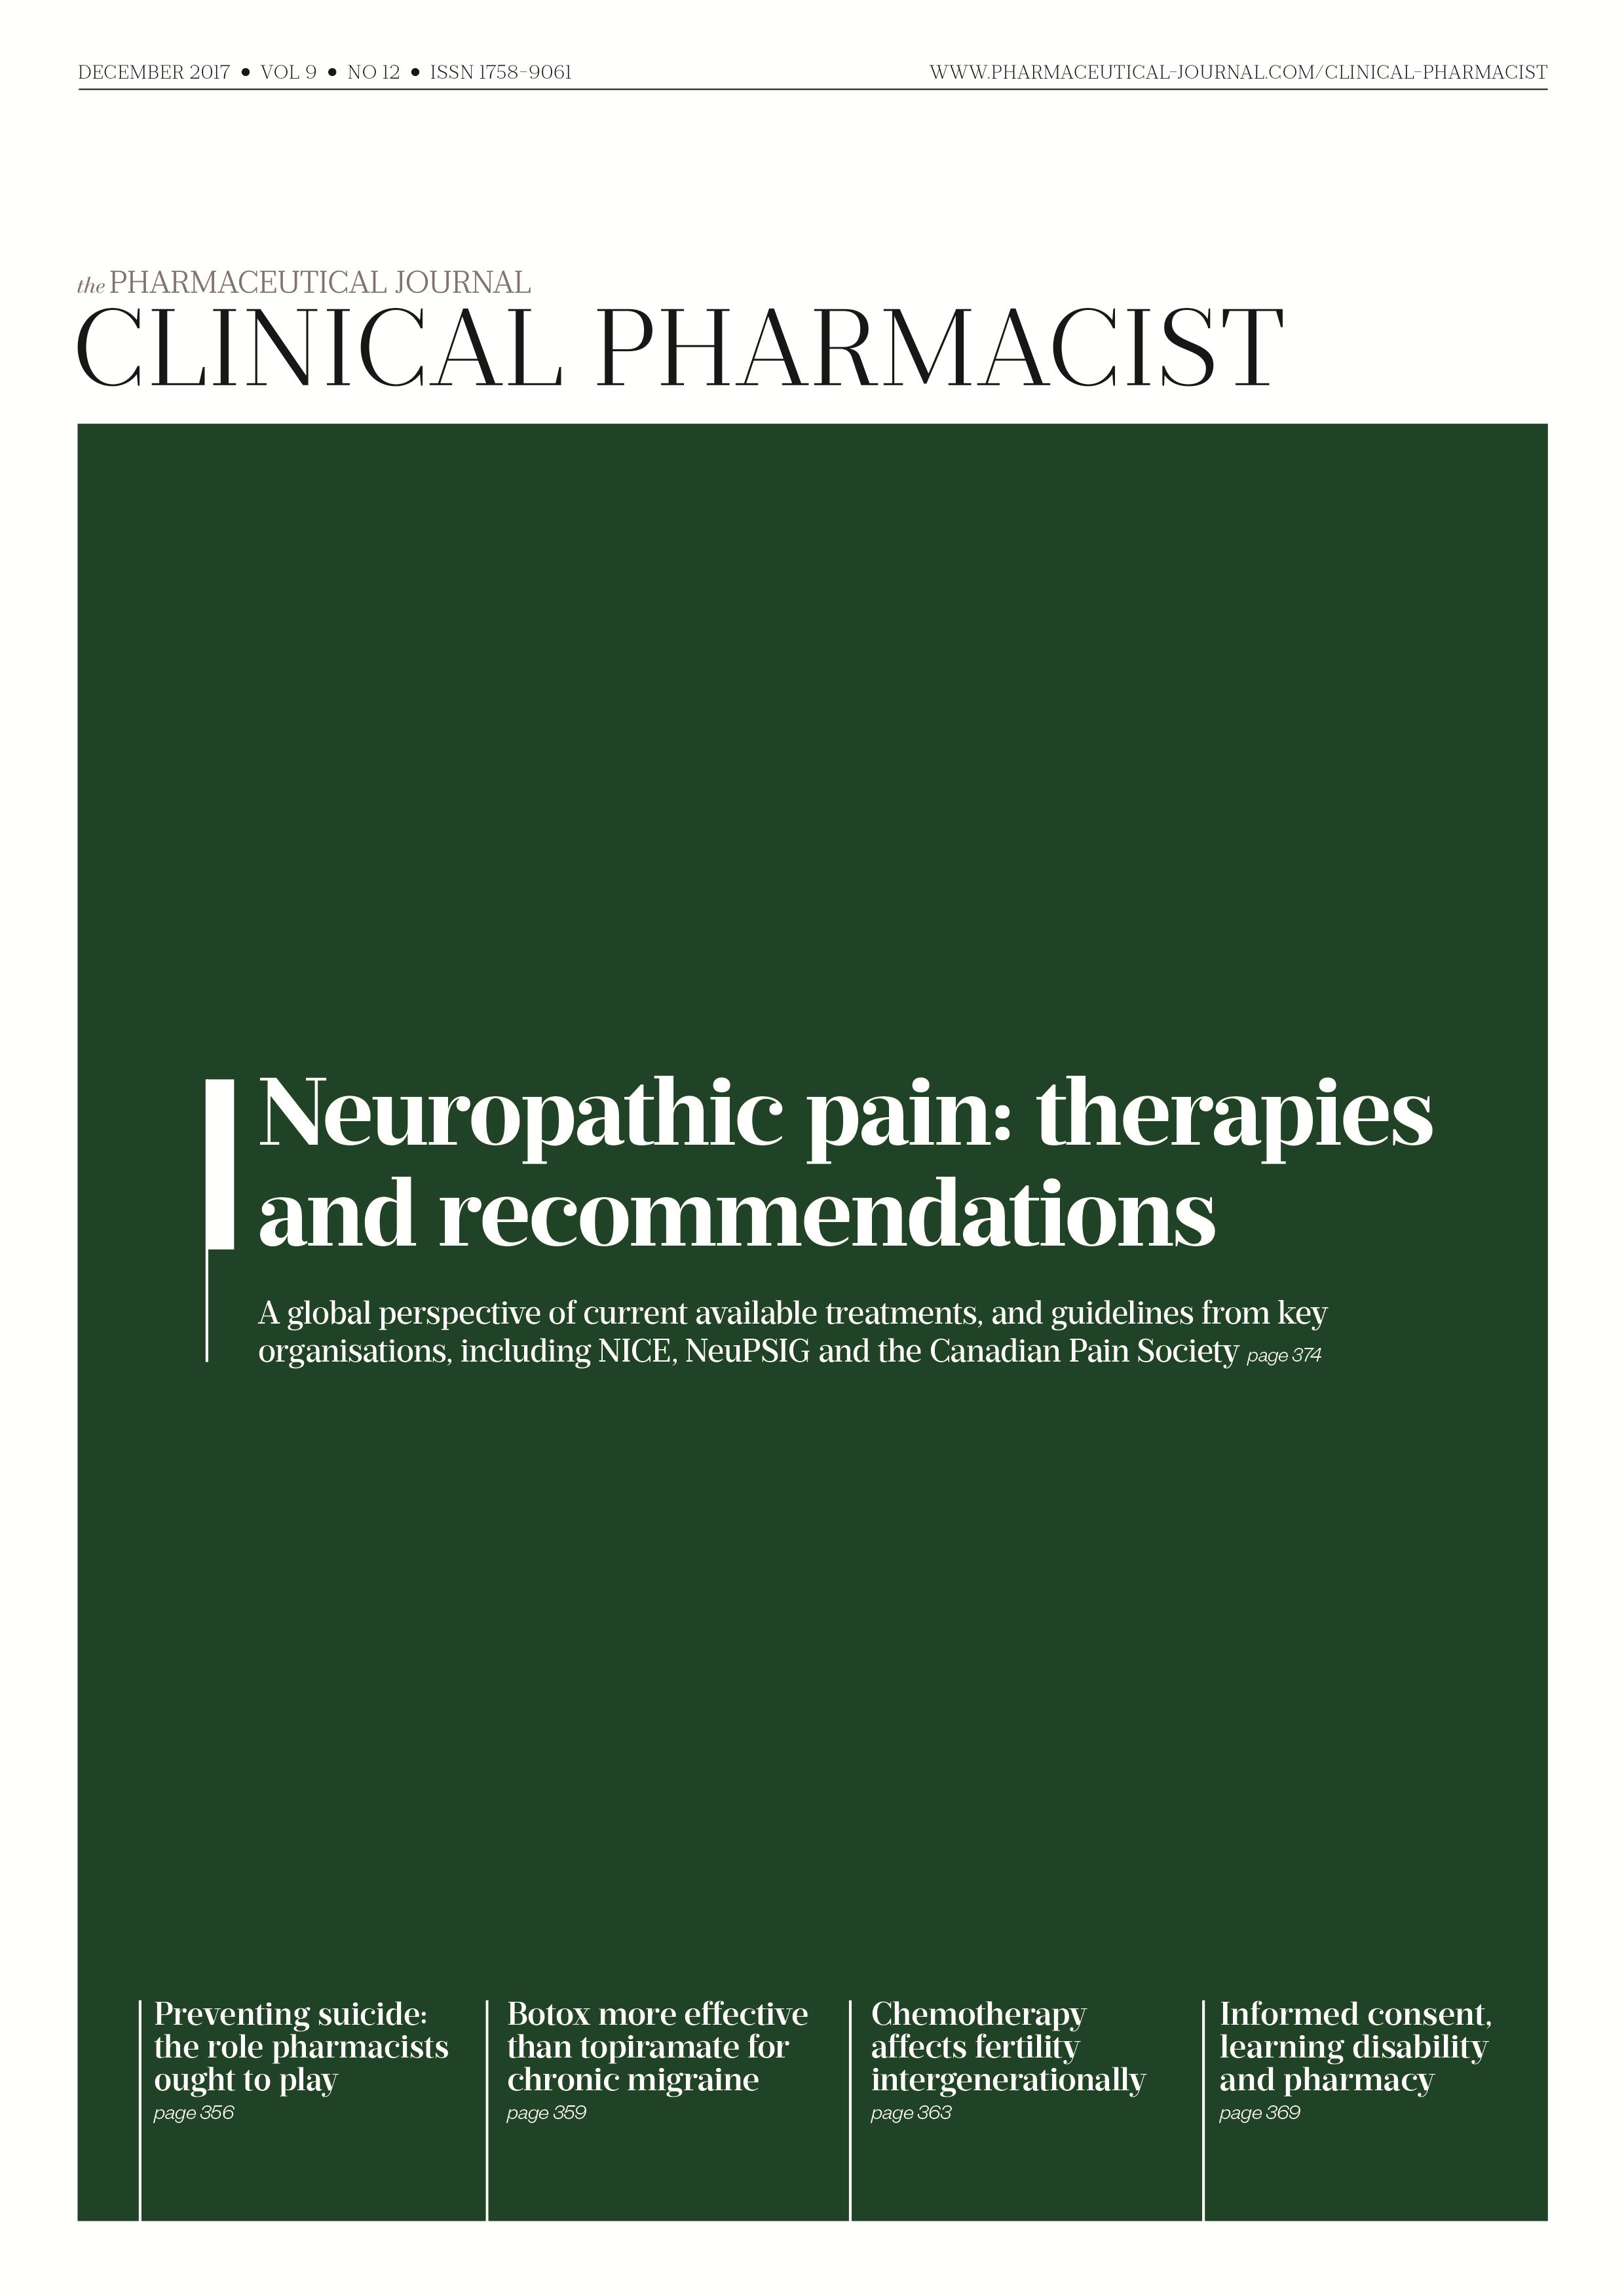 Publication issue cover for CP, December 2017, Vol 9, No 12